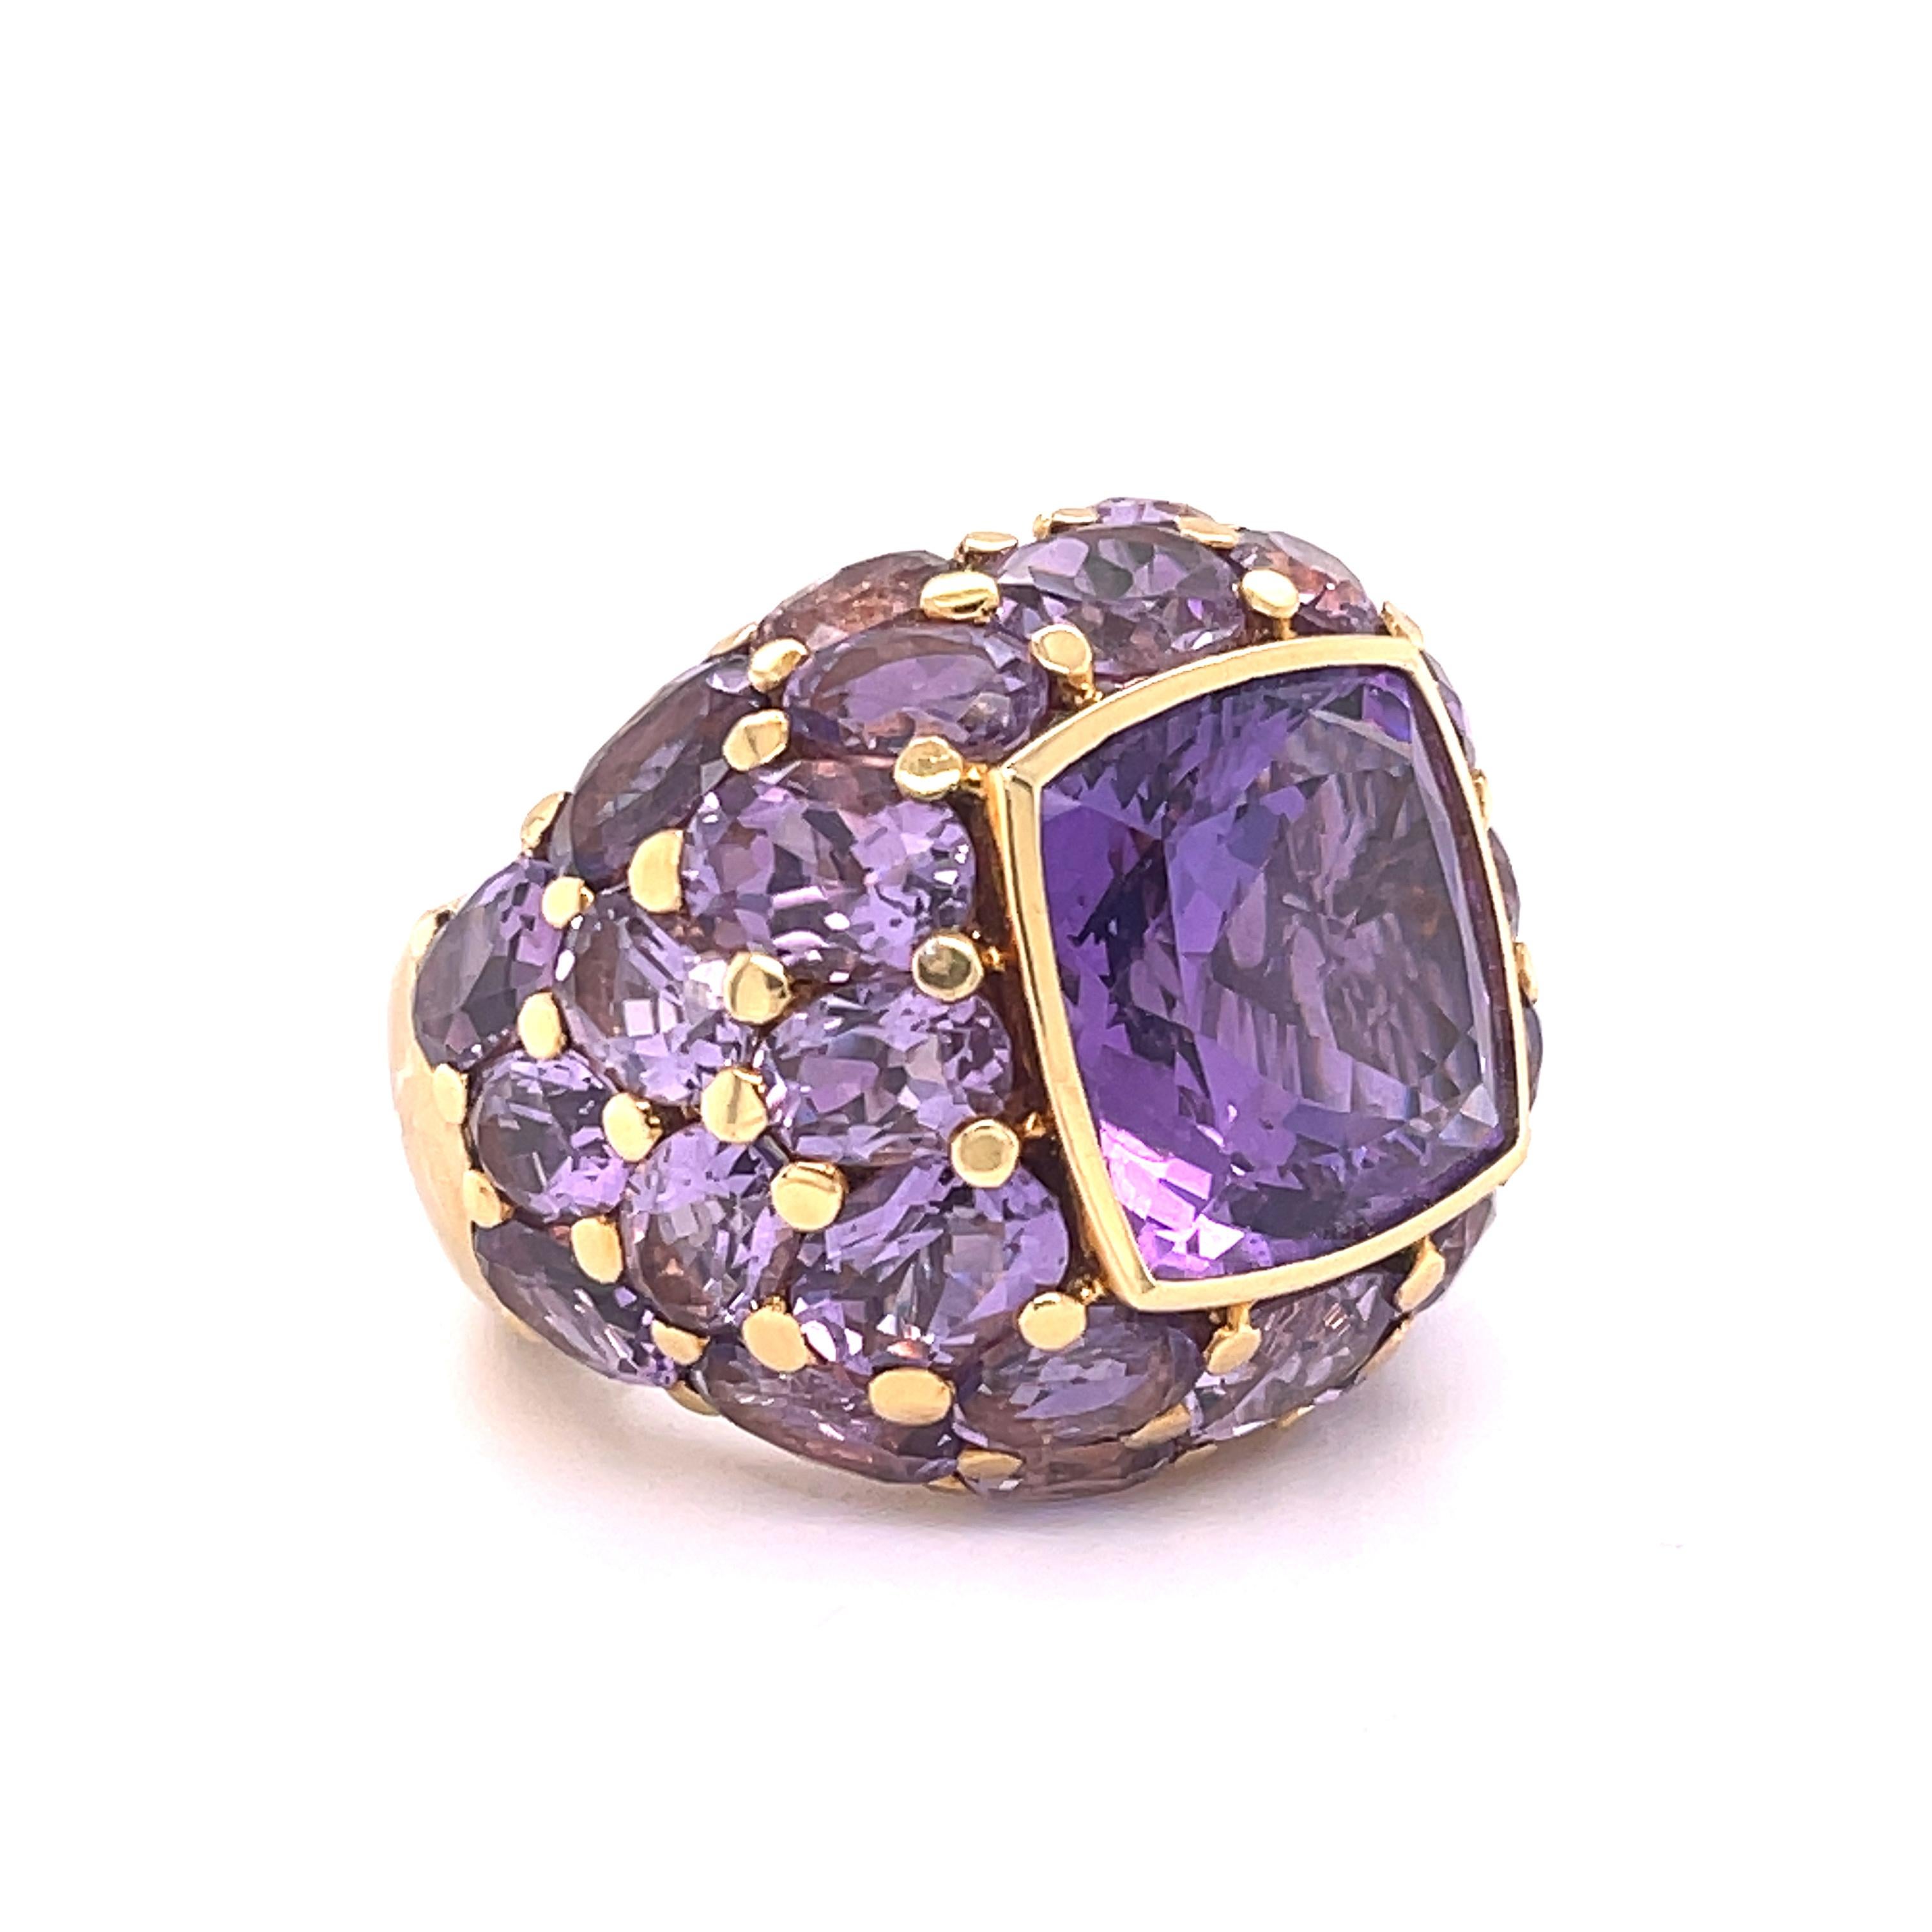 Large Amethyst center stone surrounded by round-cut amethysts on a yellow gold ring band. Perfect cocktail or fashion ring. 

• 50 Carats Amethyst 
• Hand made in Italy 
• Mimi 
• 18k Gold

Complimentary appraisal and ring resizing are available